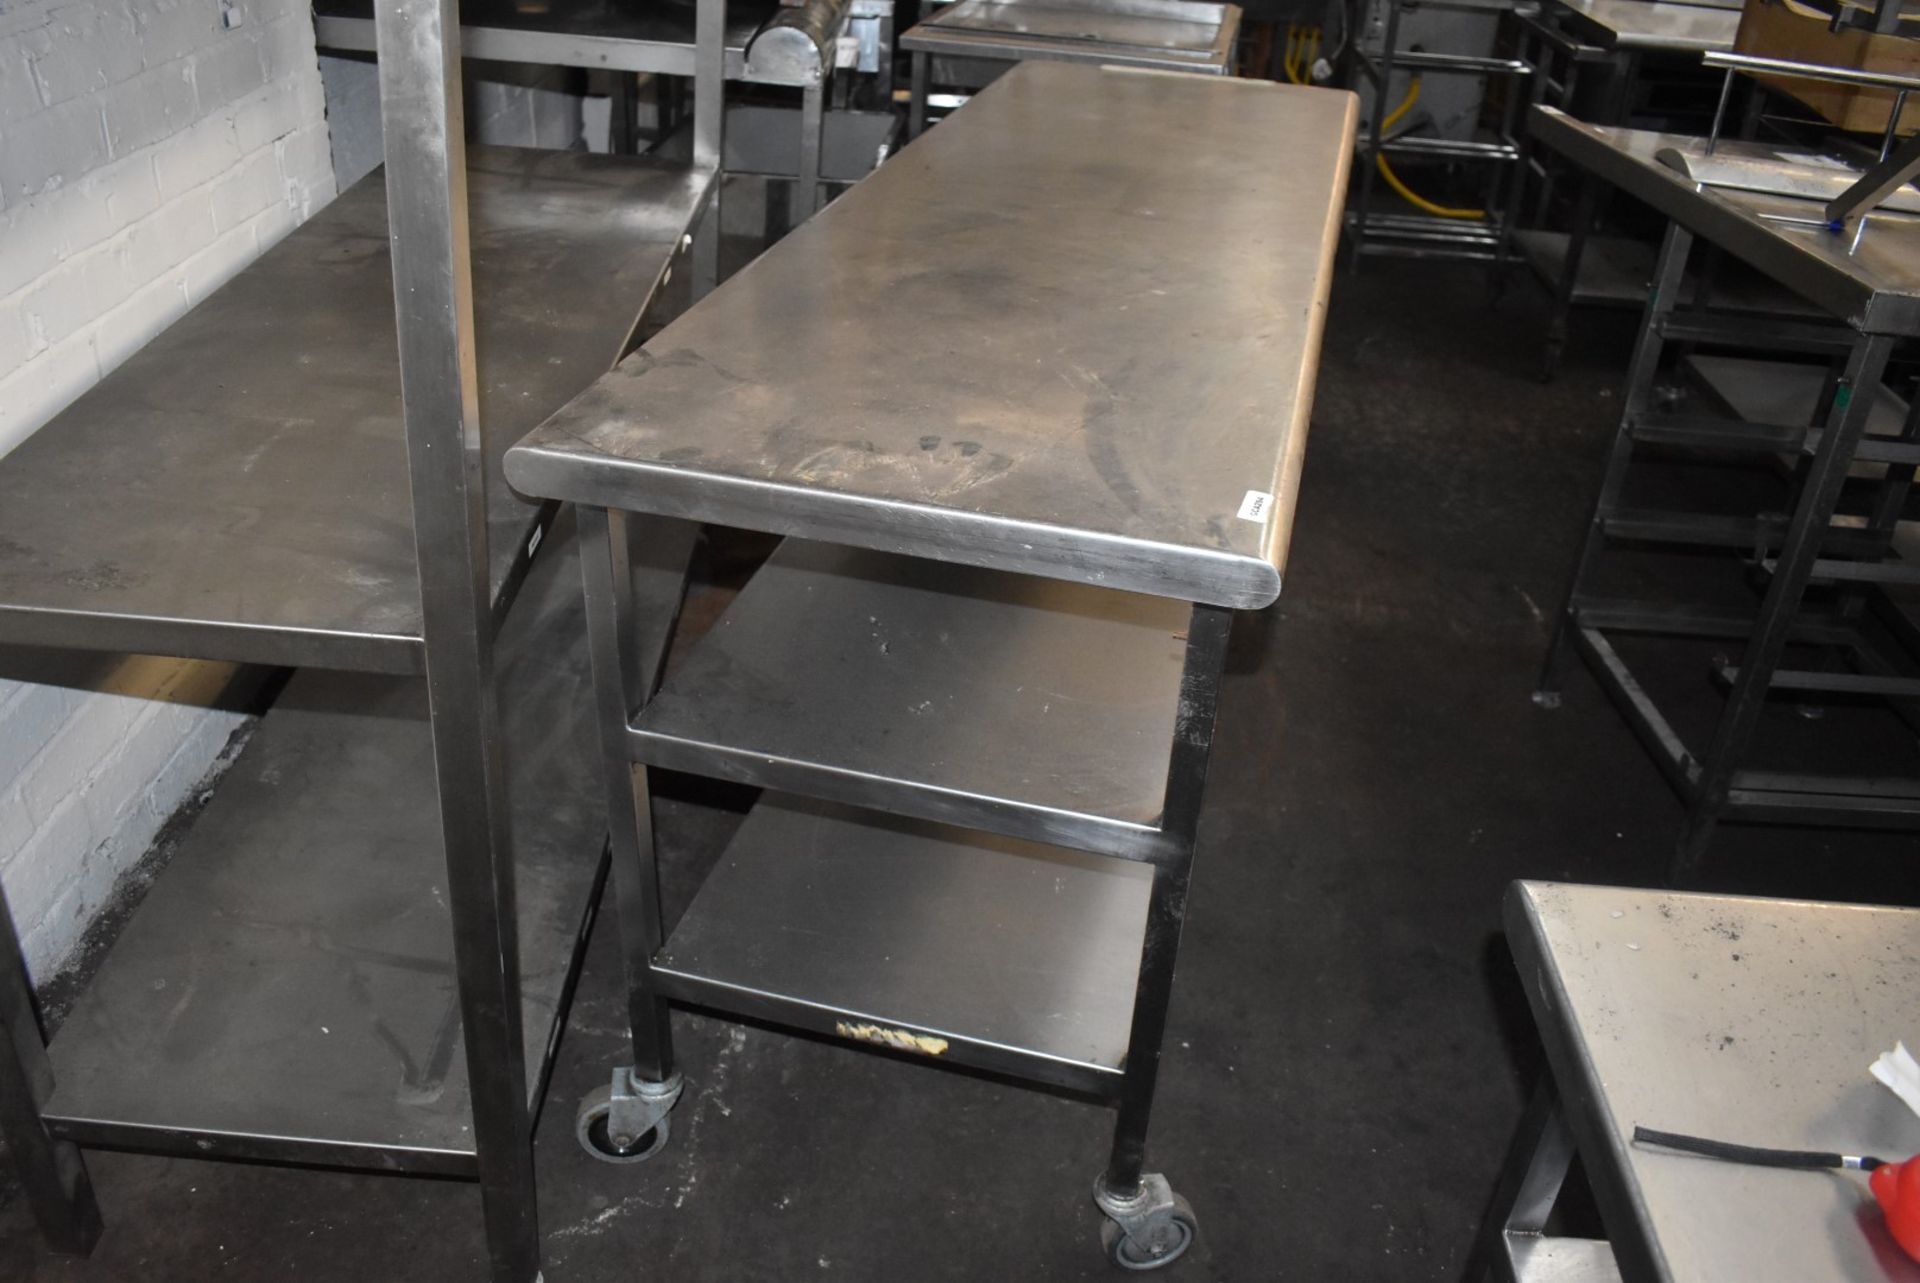 1 x Stainless Steel Prep Table Featuring Castor Wheels, Undershelves and Knife Block - Size: H87 x - Image 4 of 8